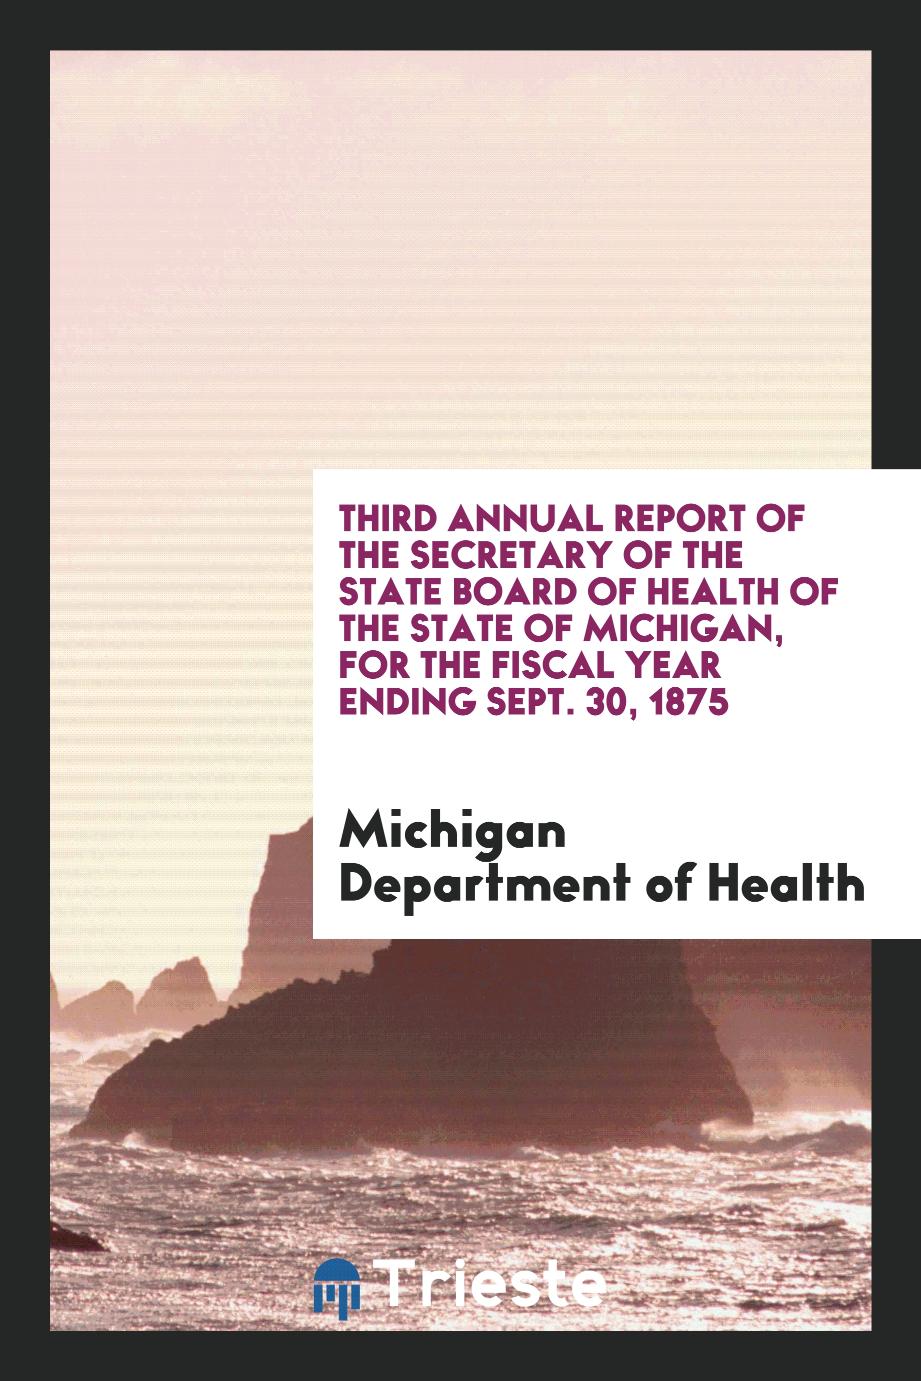 Third Annual Report of the Secretary of the State Board of Health of the State of Michigan, for the Fiscal Year Ending Sept. 30, 1875